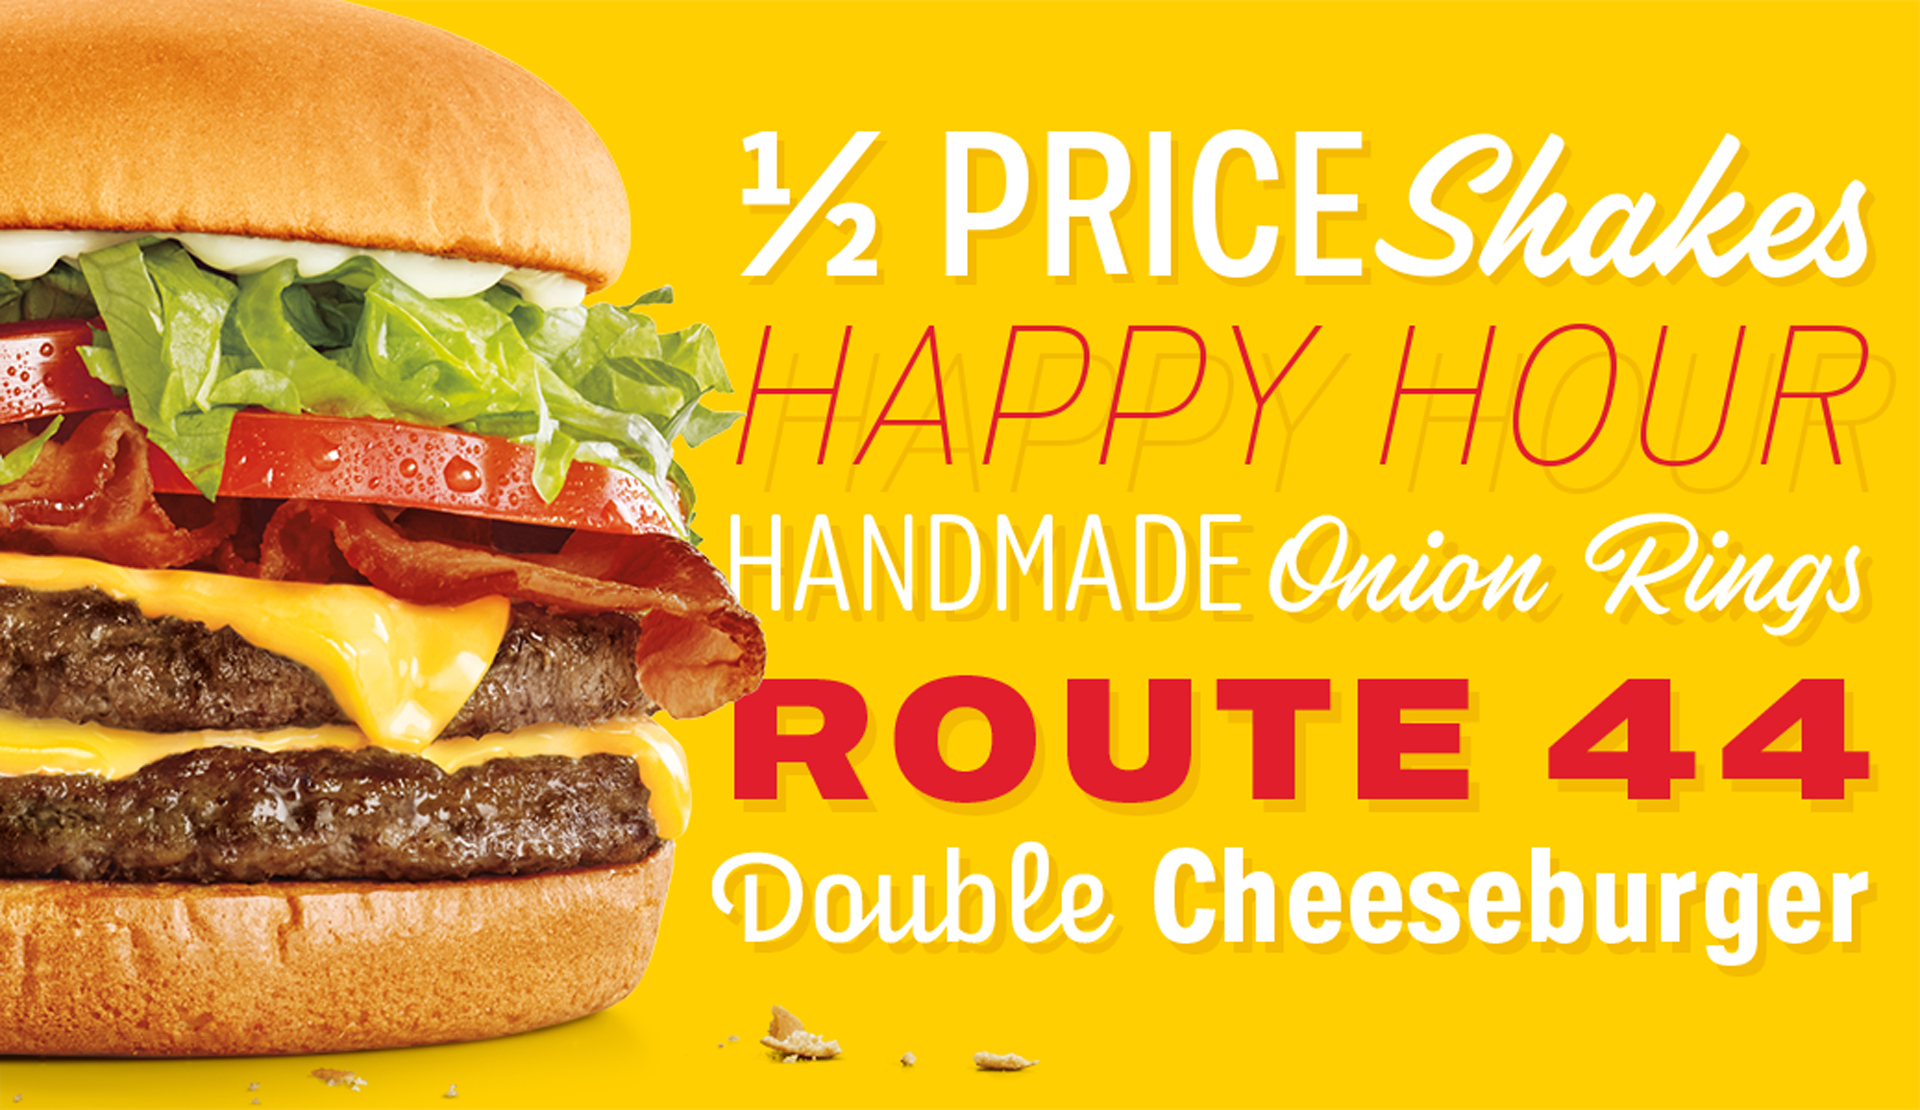 Sonic Typeface Sampler with Cheeseburger